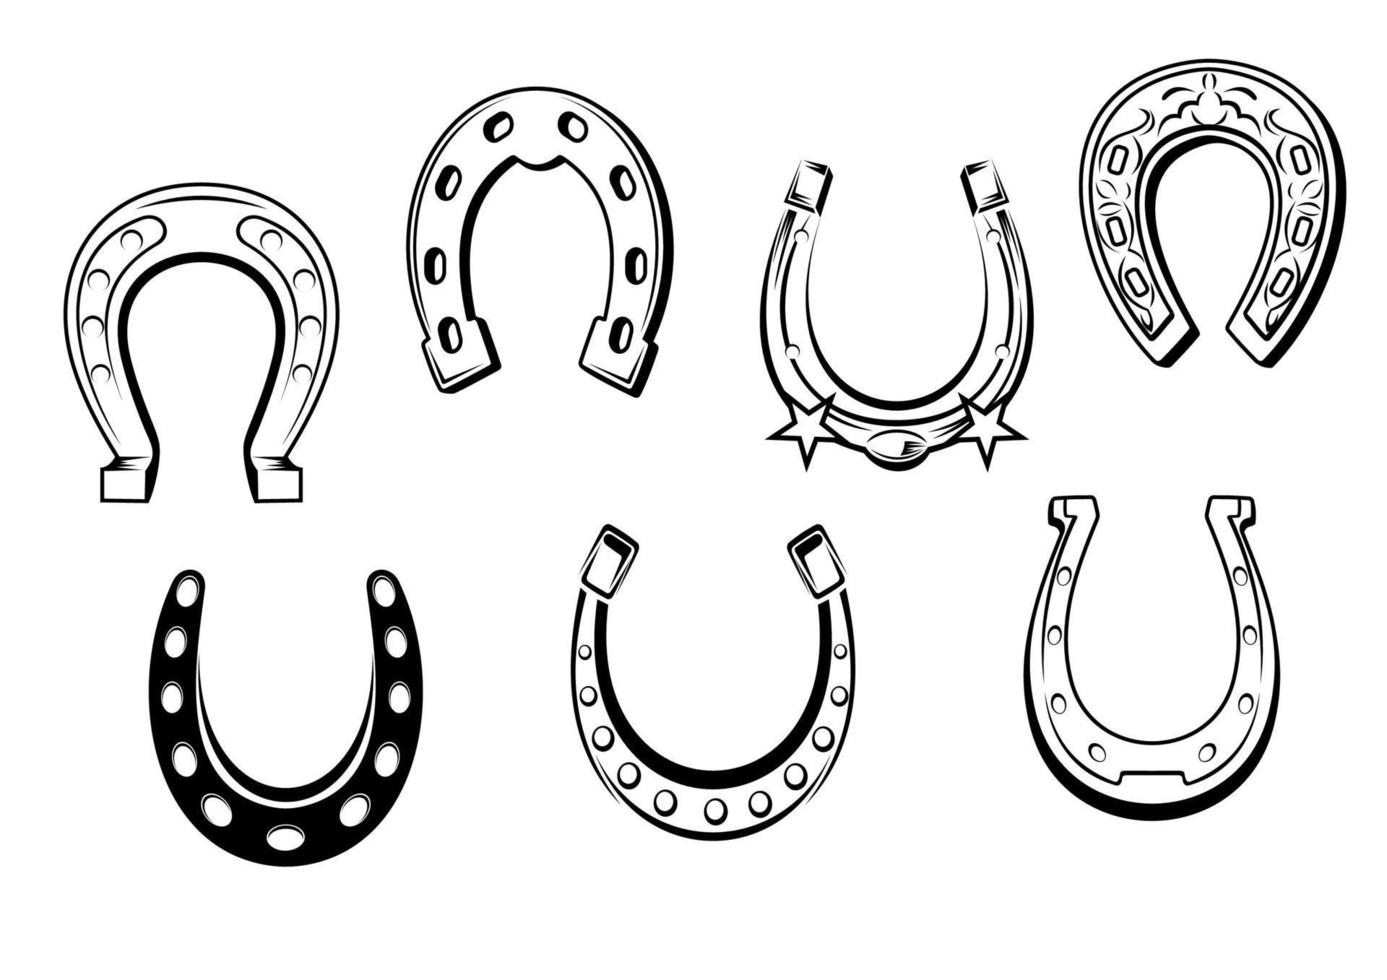 Lucky horseshoes objects vector